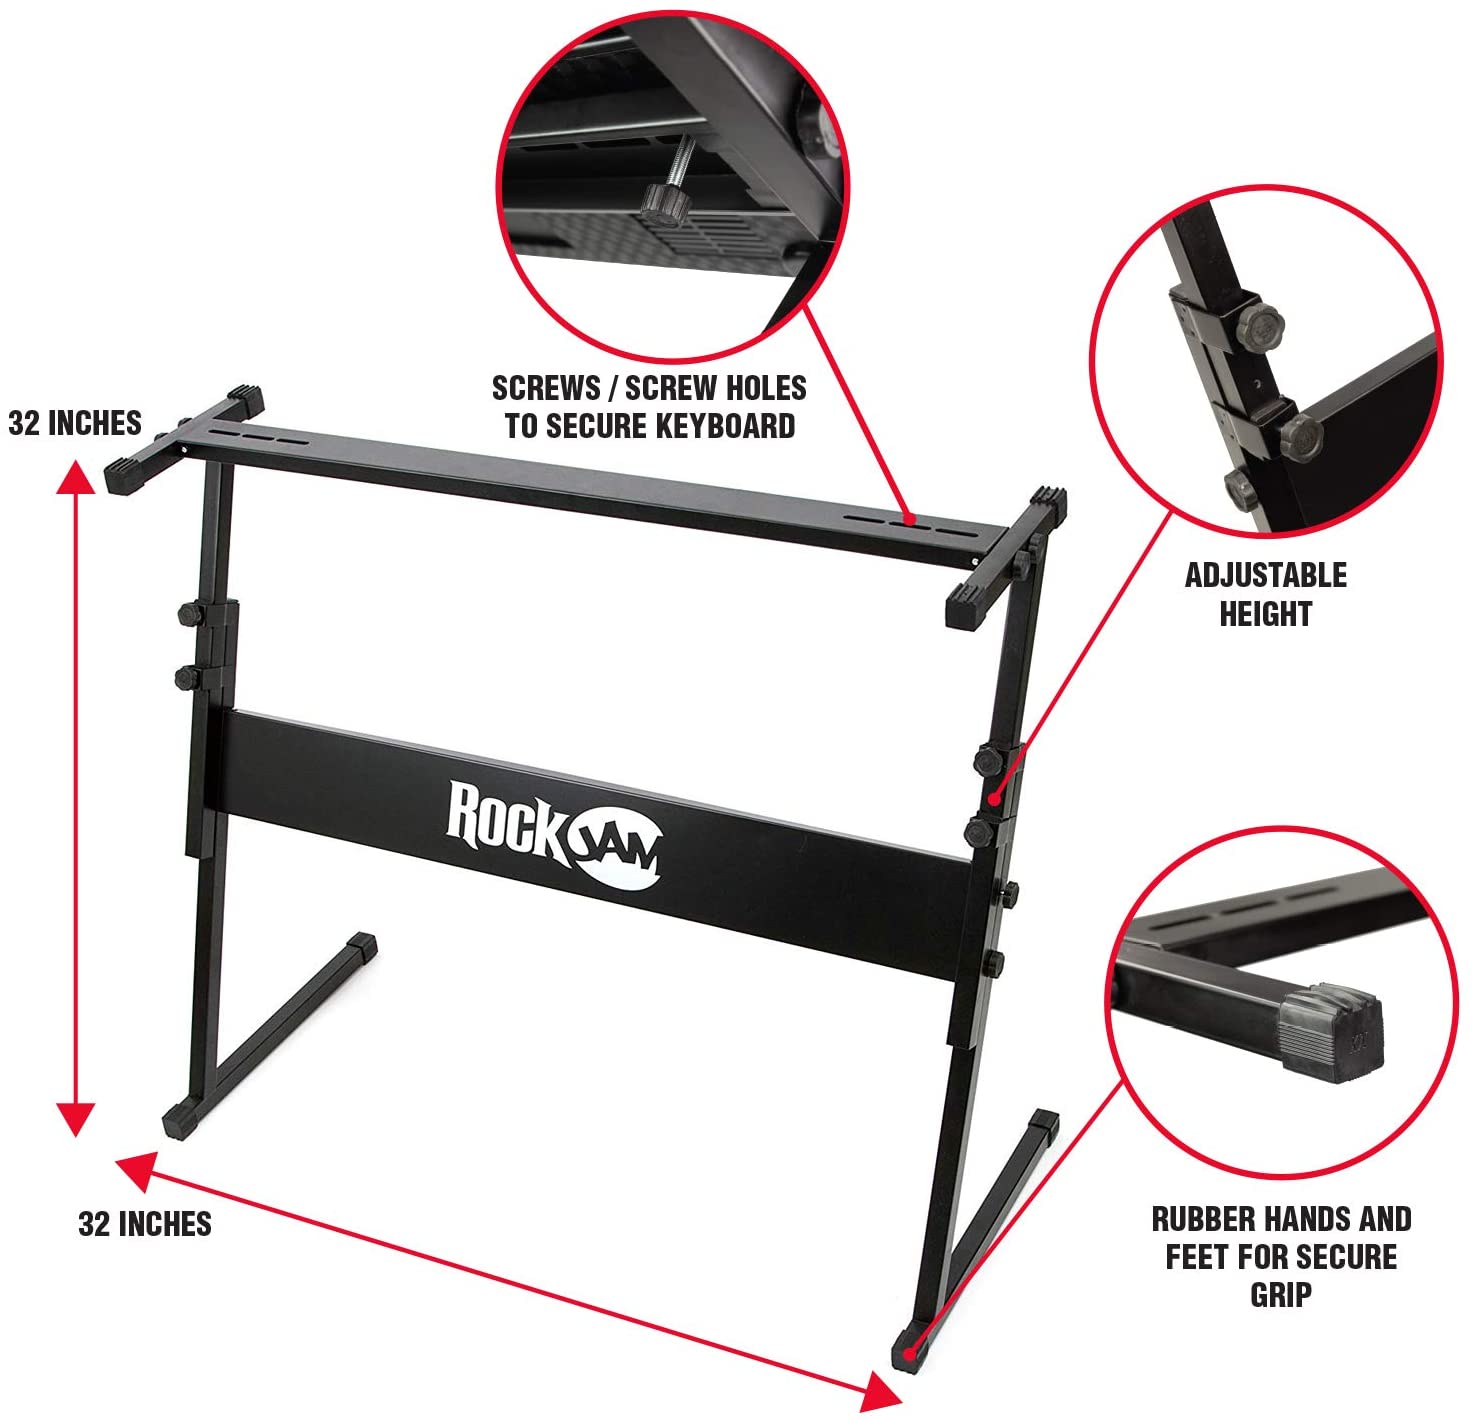 RockJam 61-Key Electronic stand and its specifications